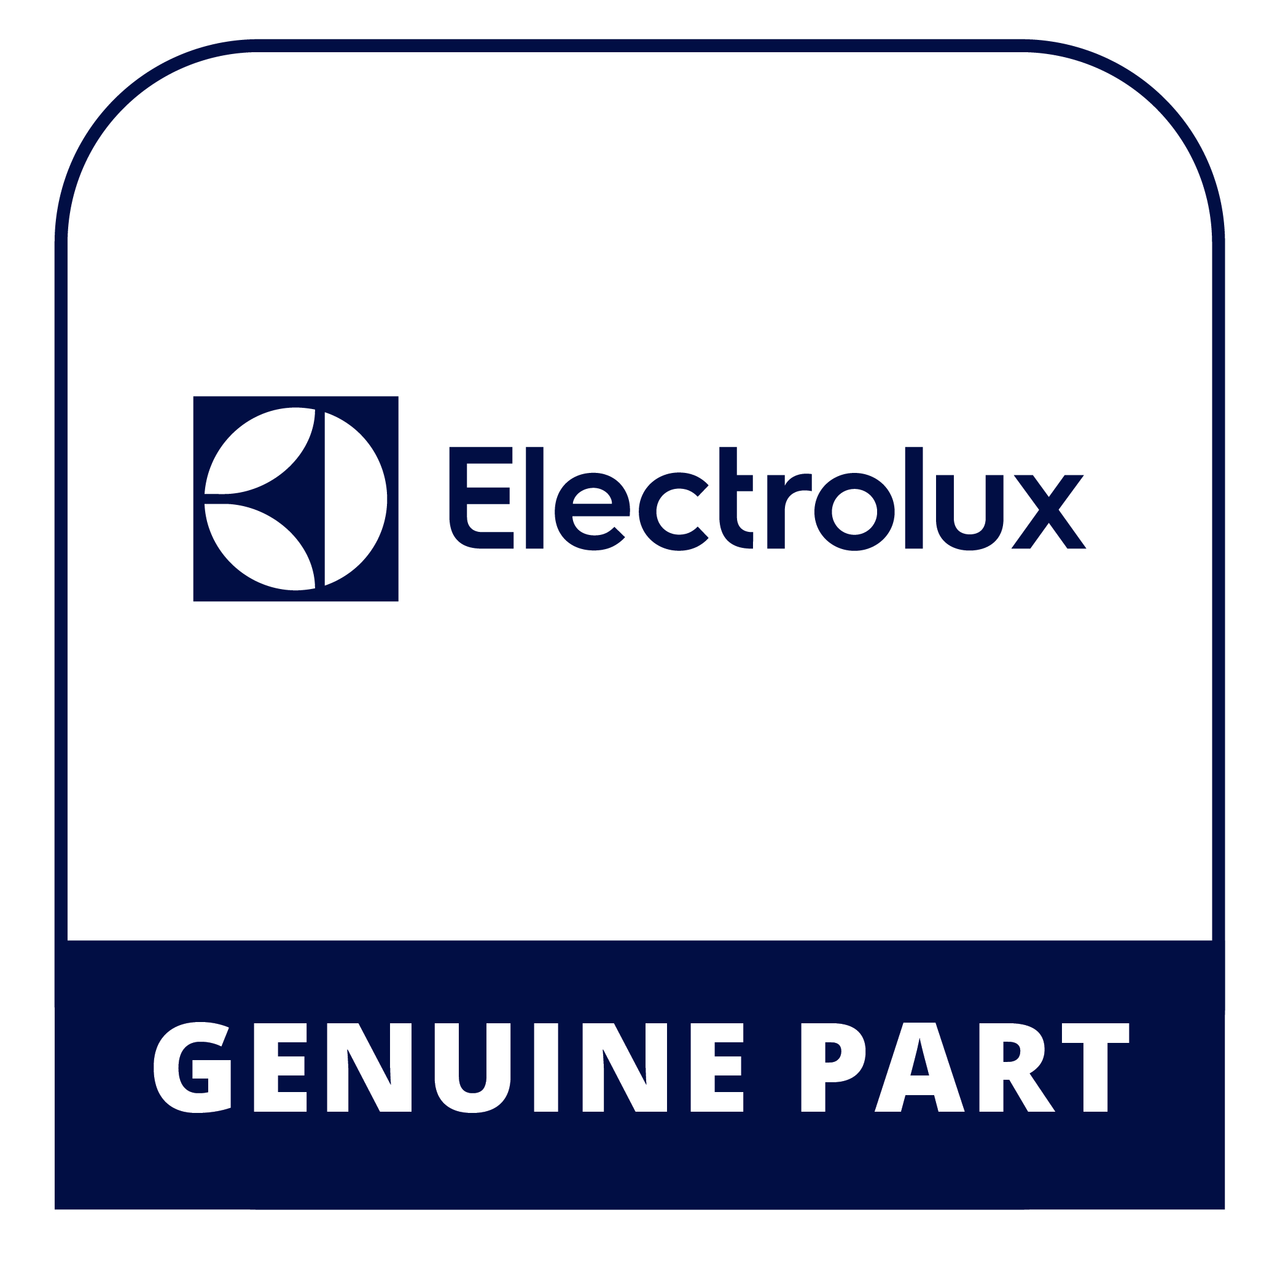 Frigidaire - Electrolux 5304499442 Use And Care Guide - Genuine Electrolux Part